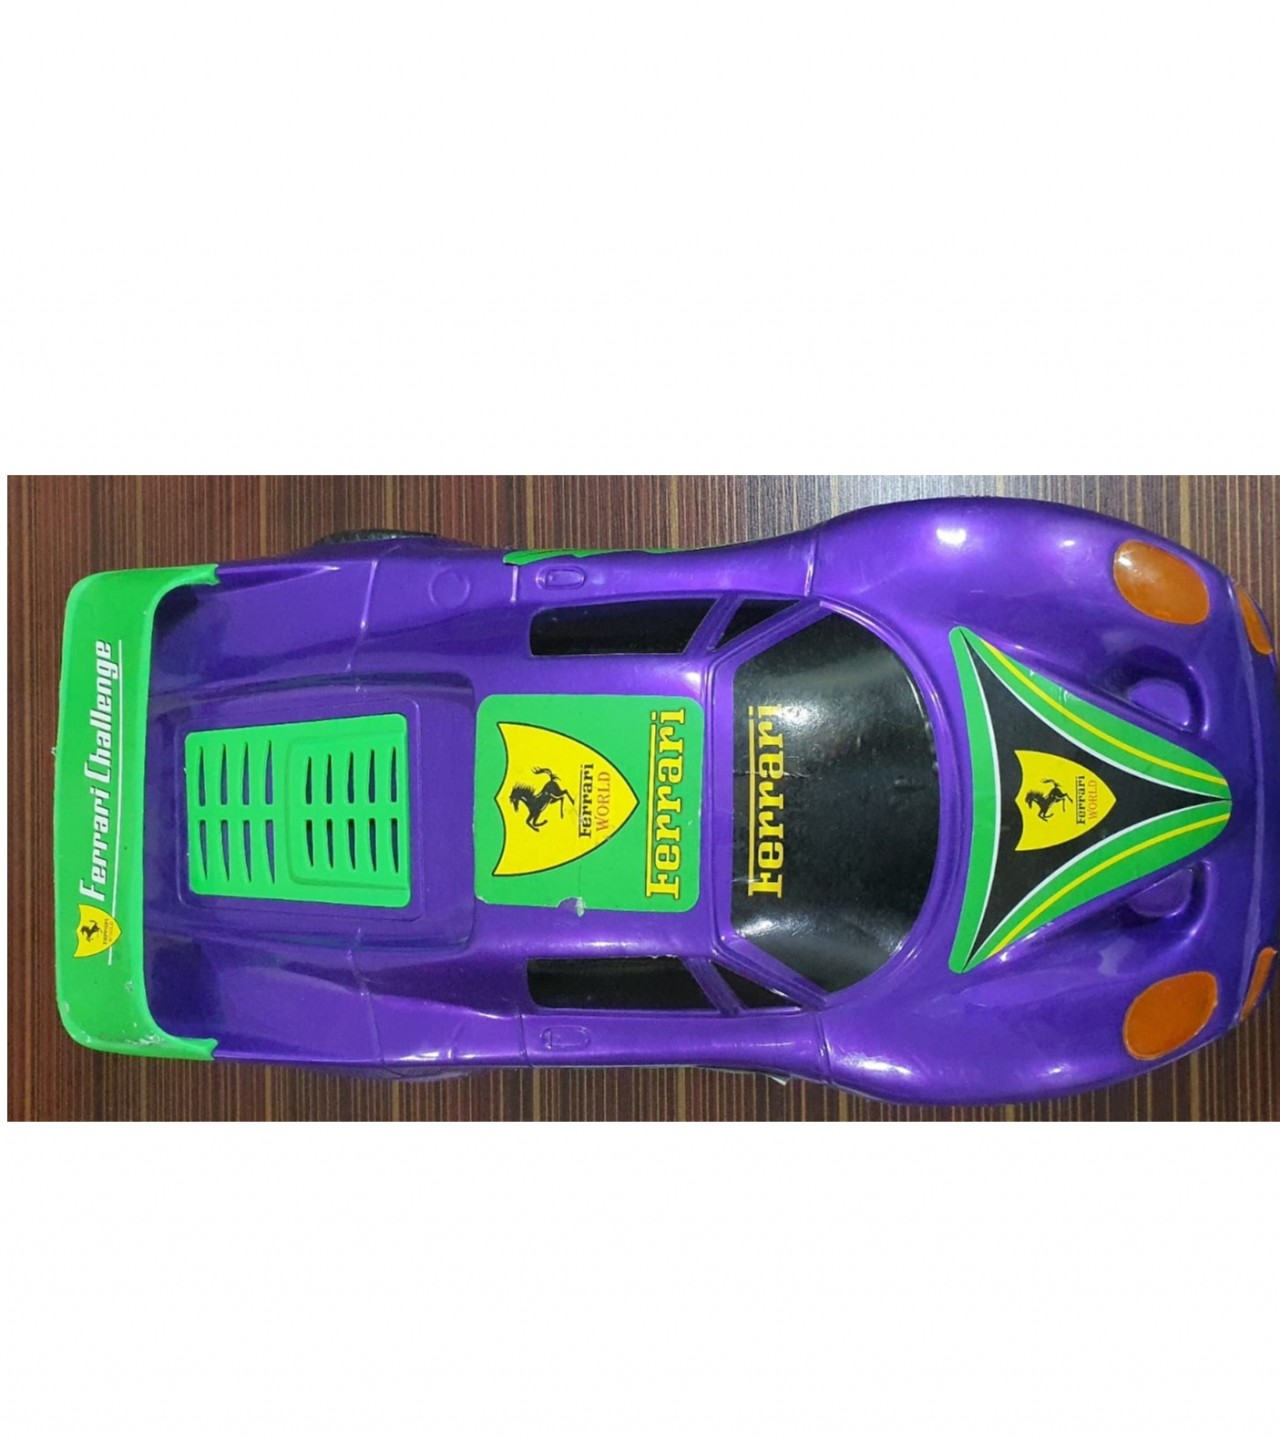 Baby Ferrari Challenge Car ( Yellow, Perpal, White,) Size 22 by 10